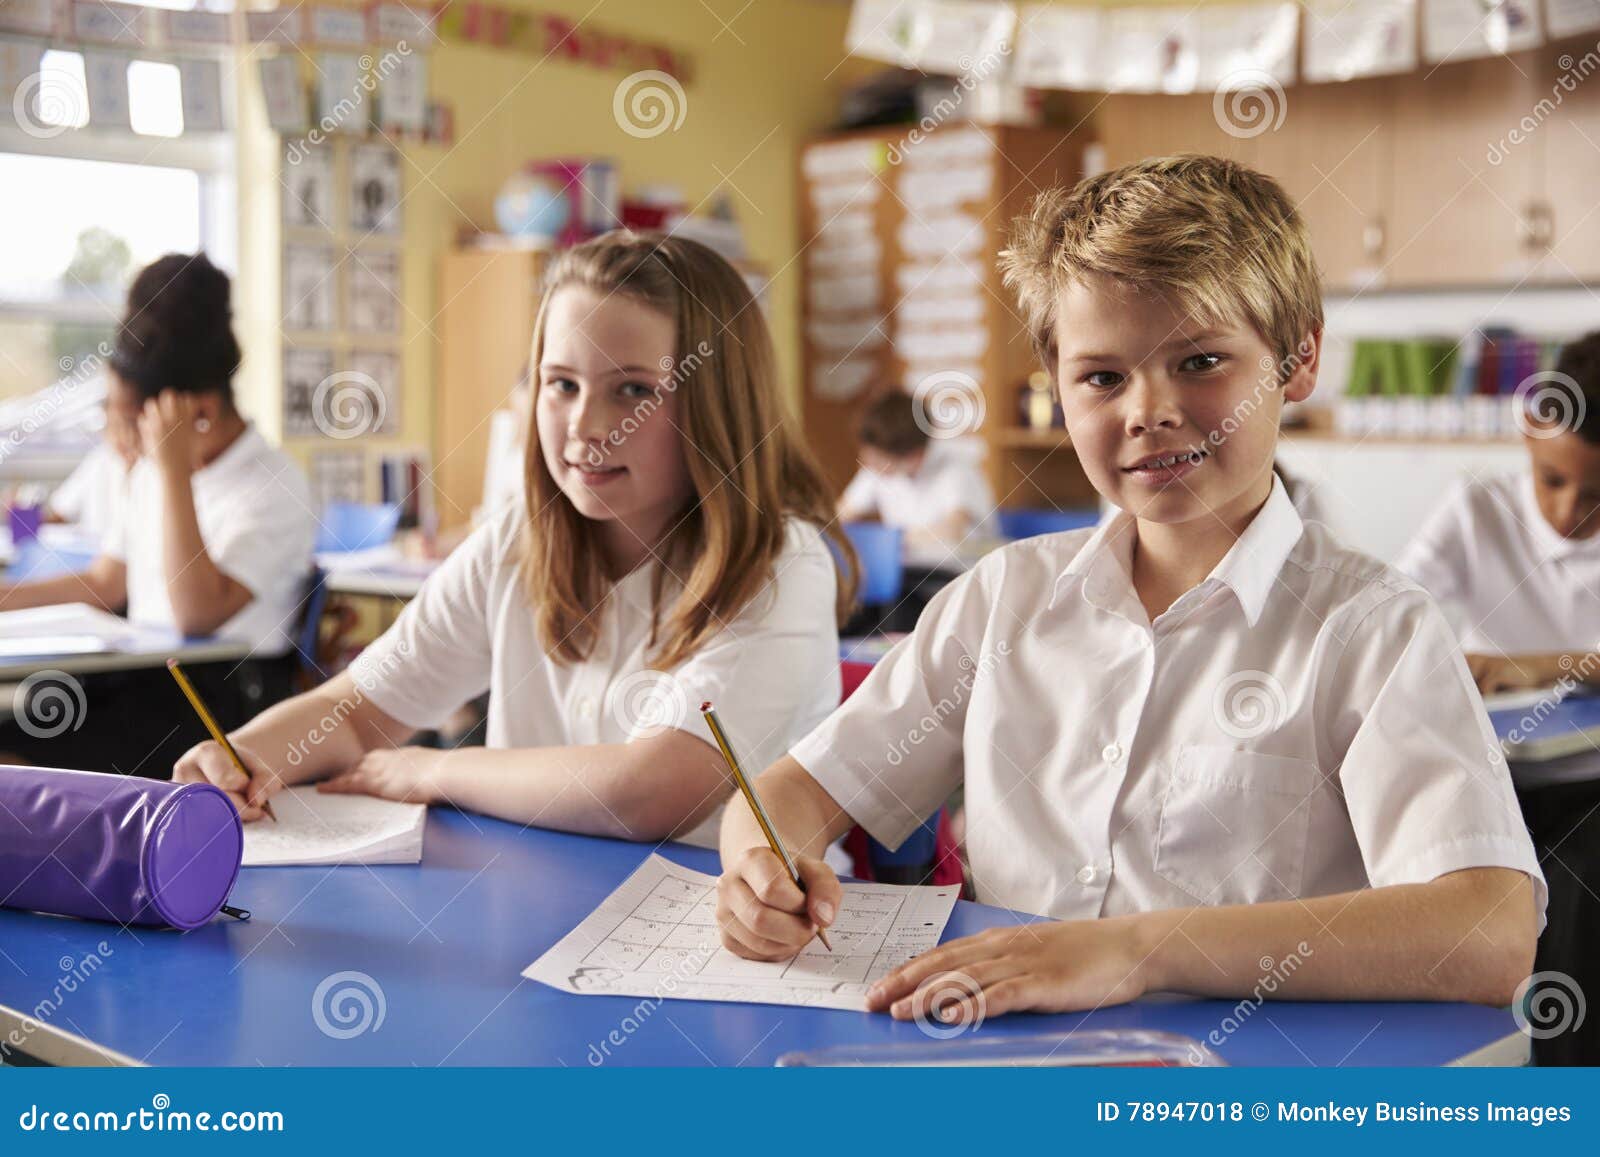 two kids in a lesson at a primary school look to camera